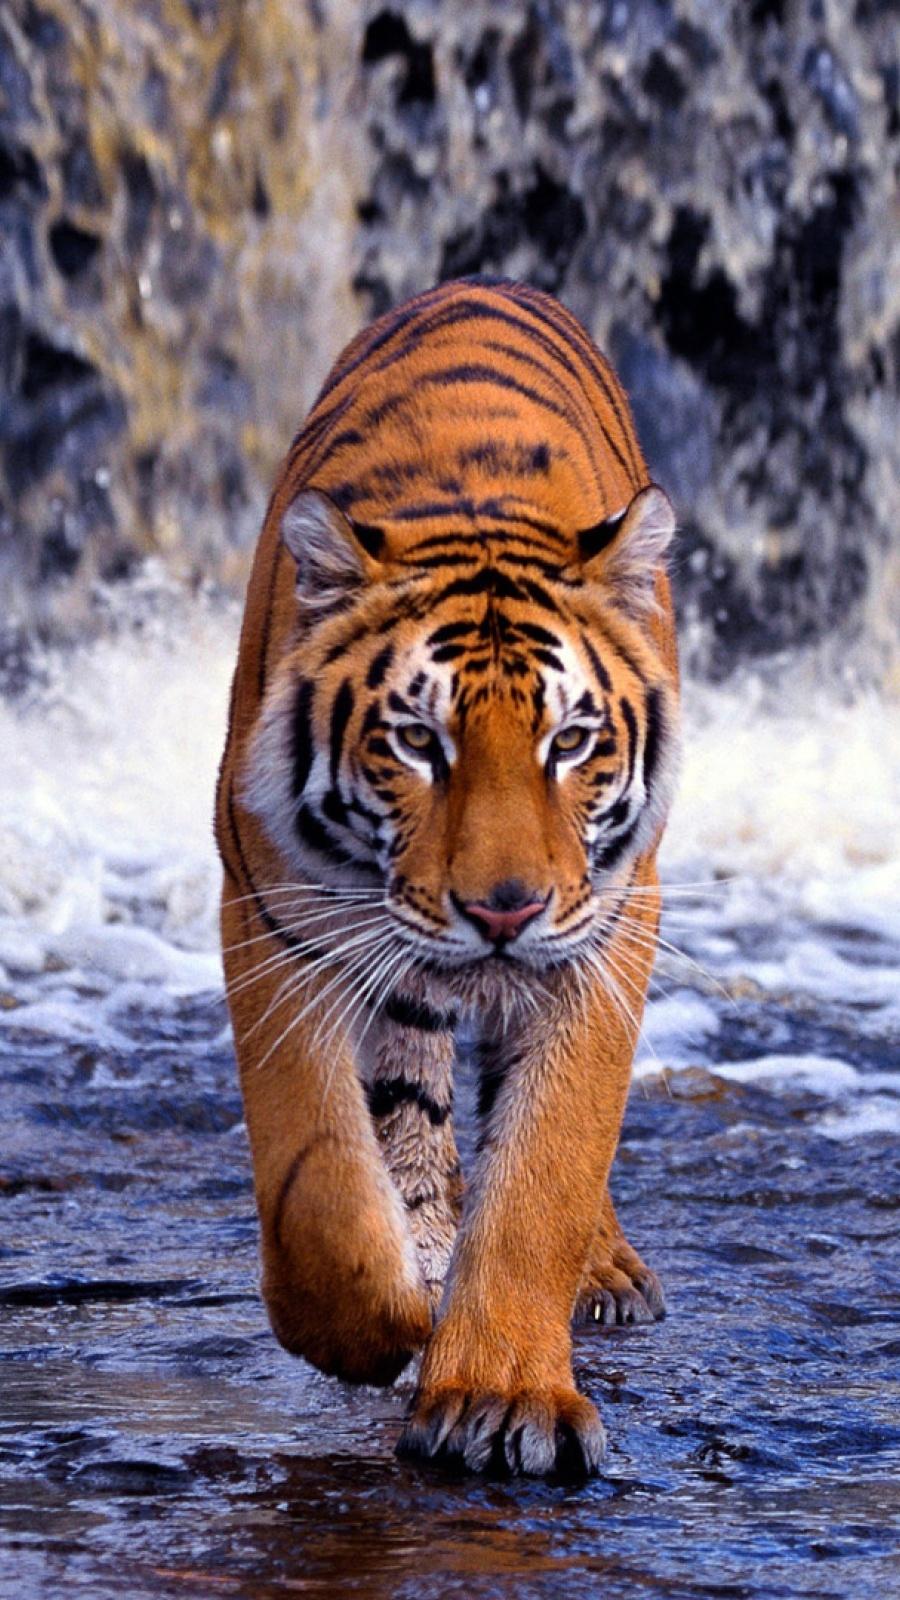 Tiger iPhone Wallpaper Free Tiger iPhone Background